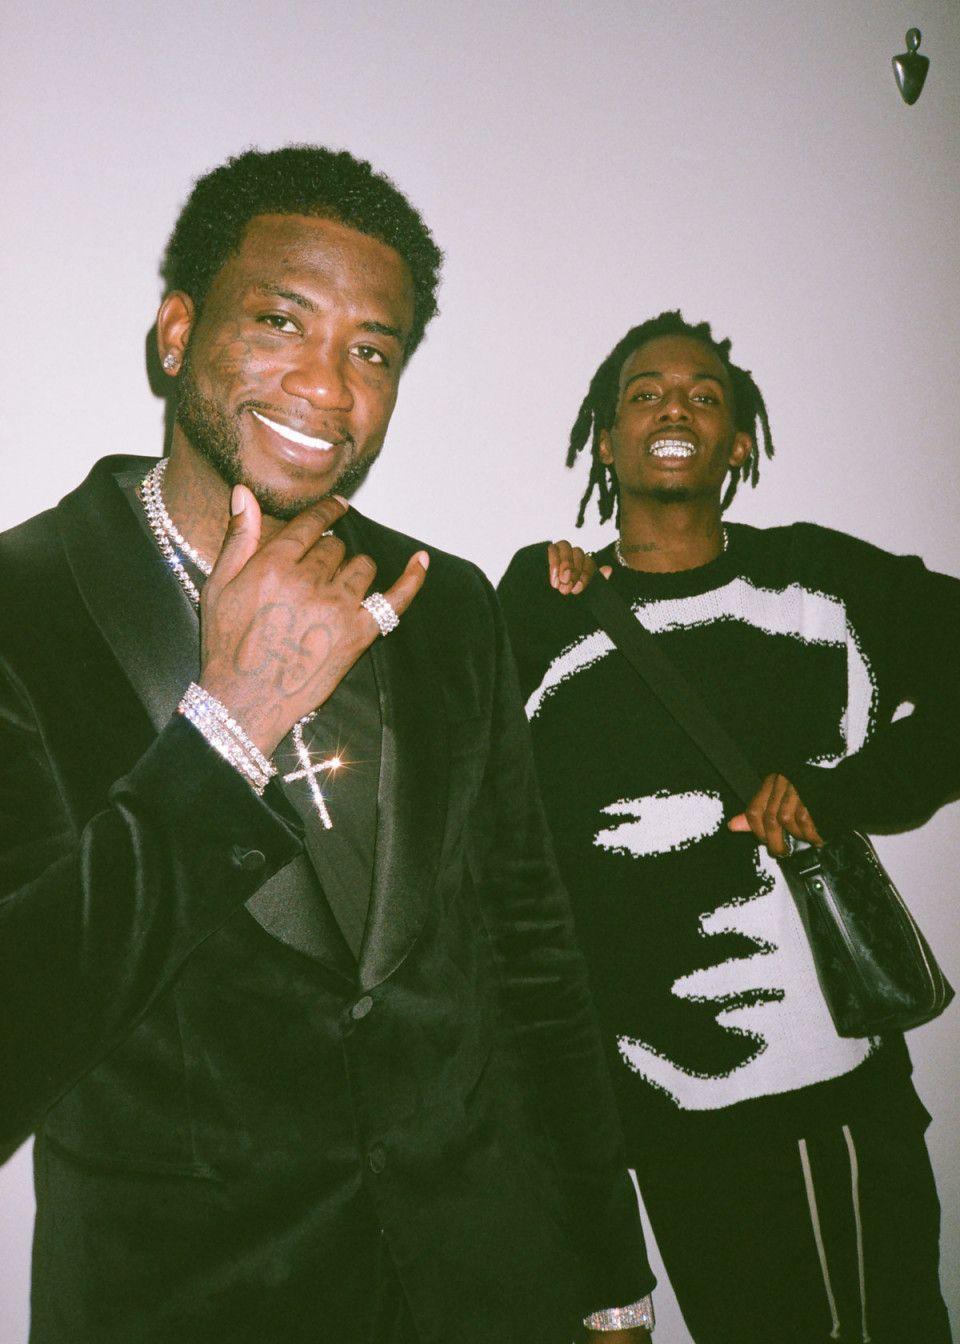 Here's What Happened When Gucci Mane Met Playboi Carti. Gucci